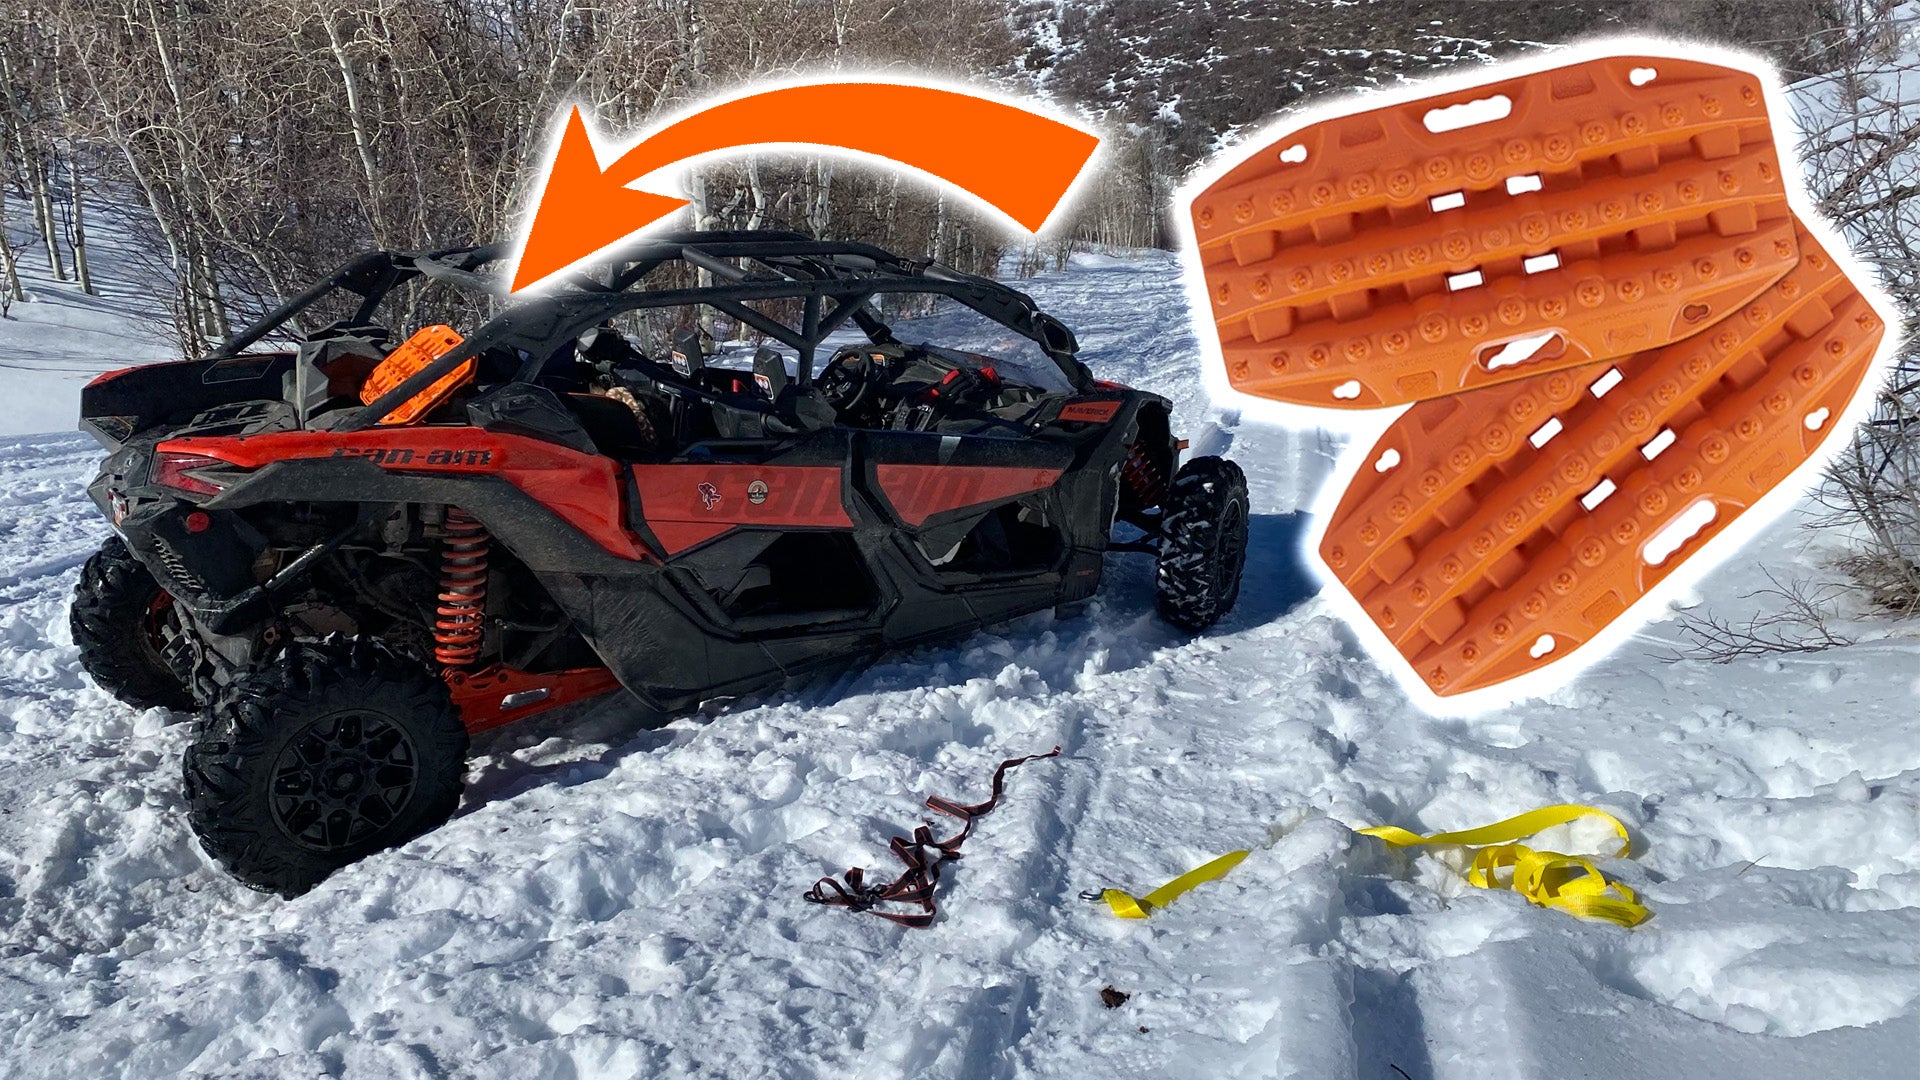 Maxtrax Mini Recovery Boards Got My Can-Am Out of Three Feet of Snow…But It Wasn’t Easy